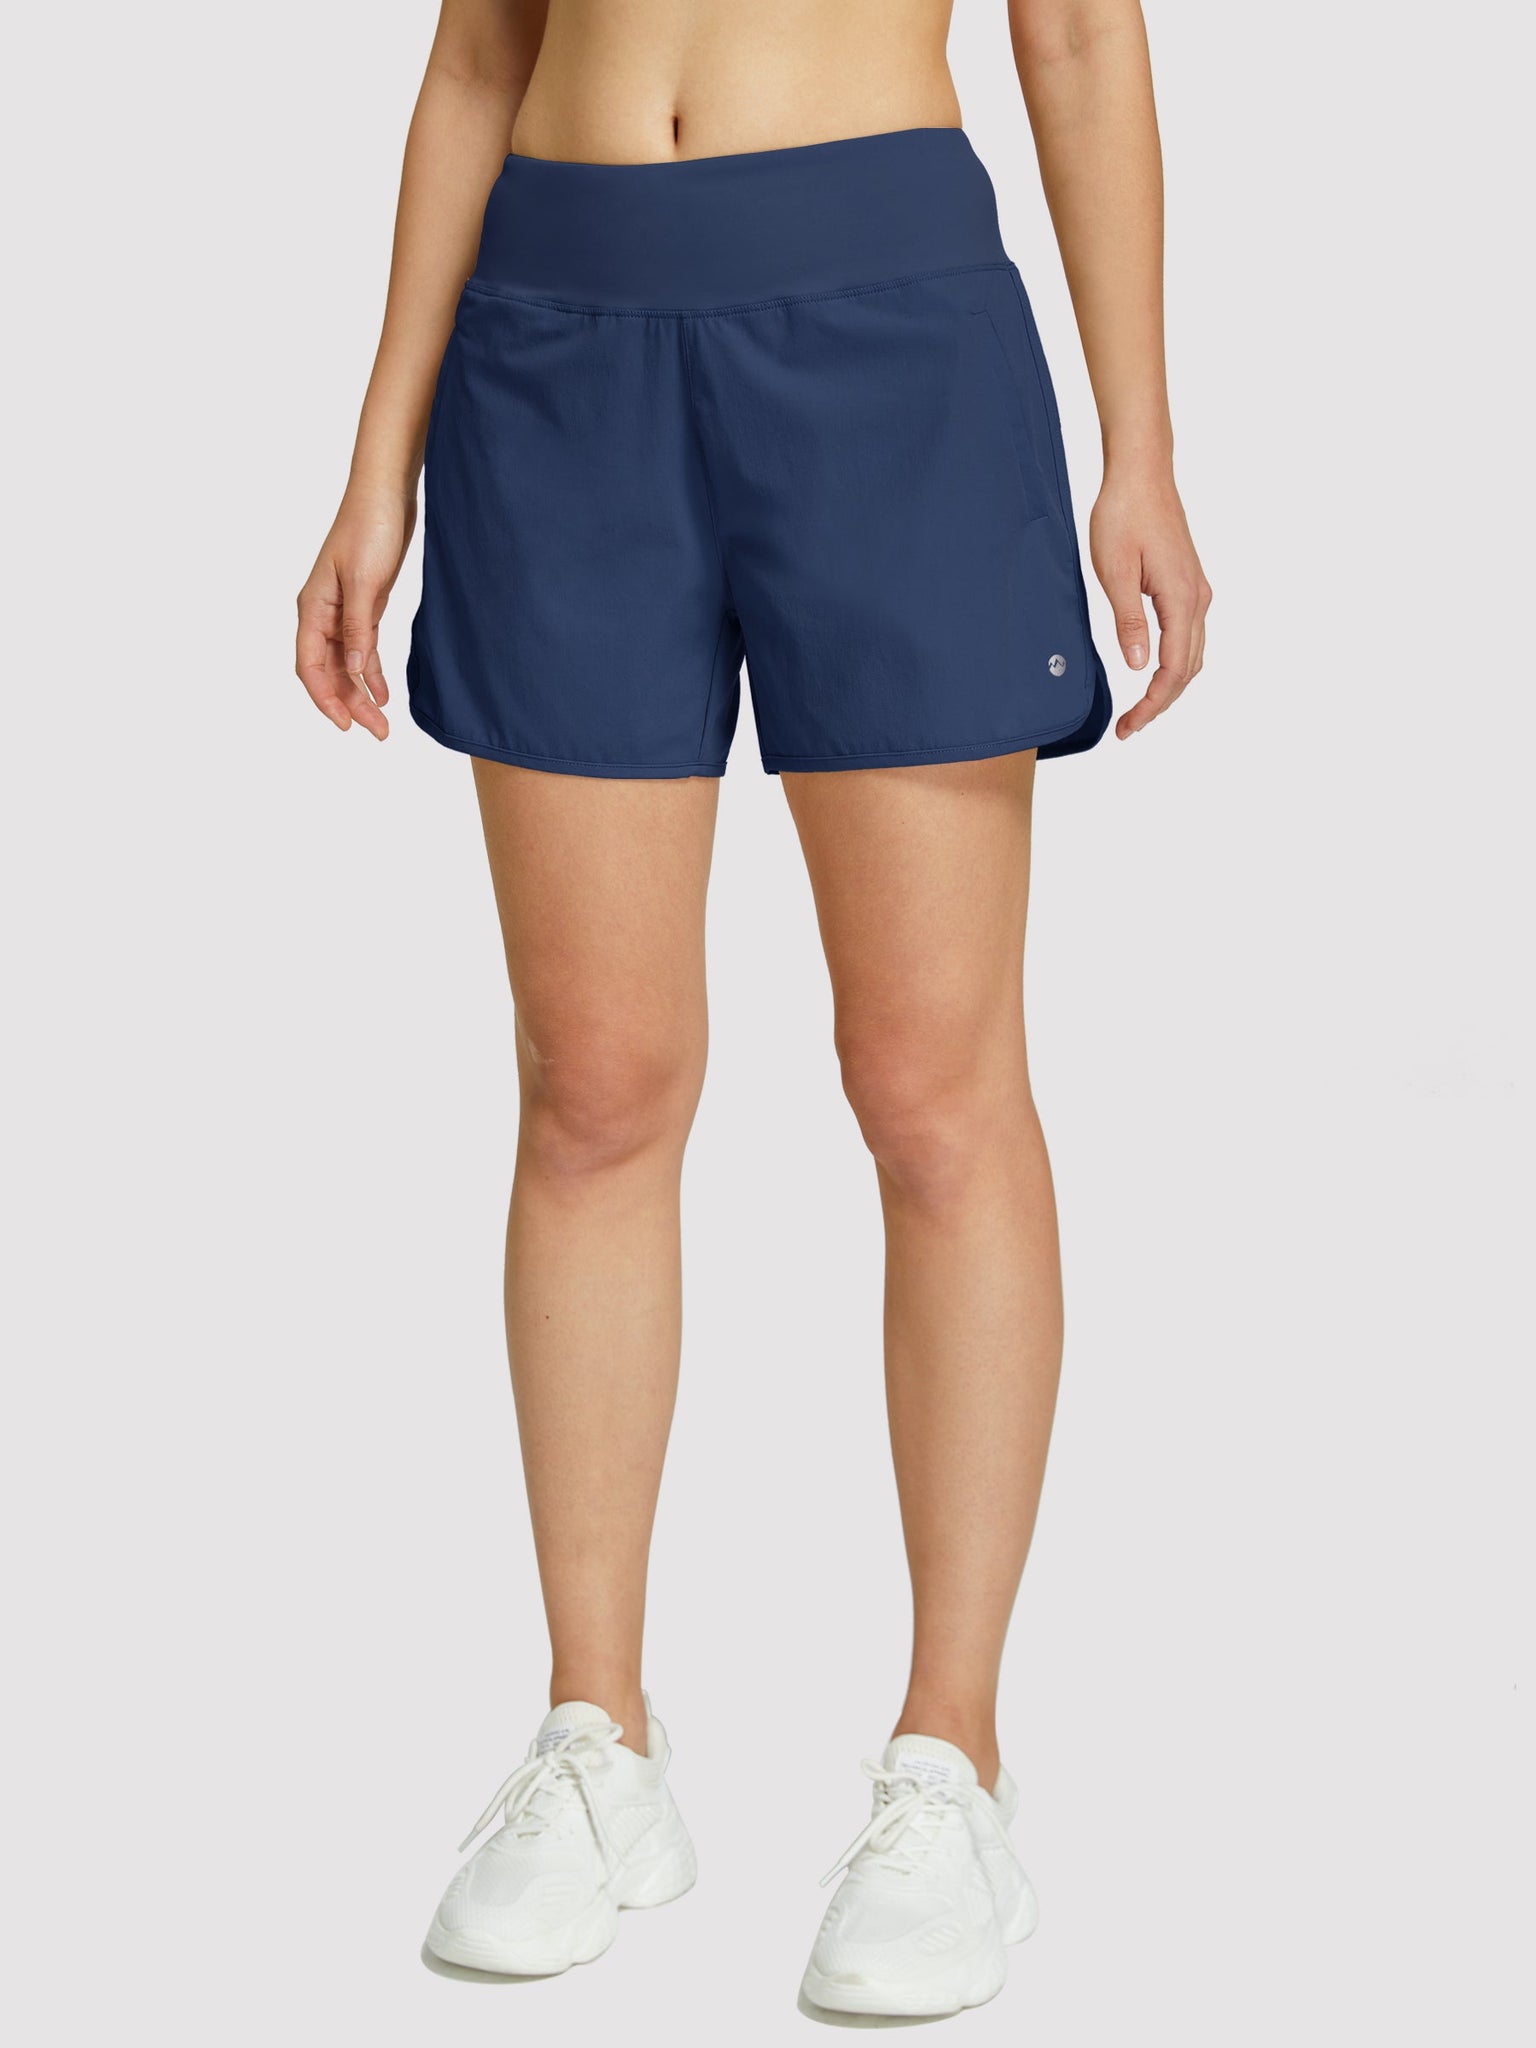 Womens High Rise Running Athletic Shorts_Navy1